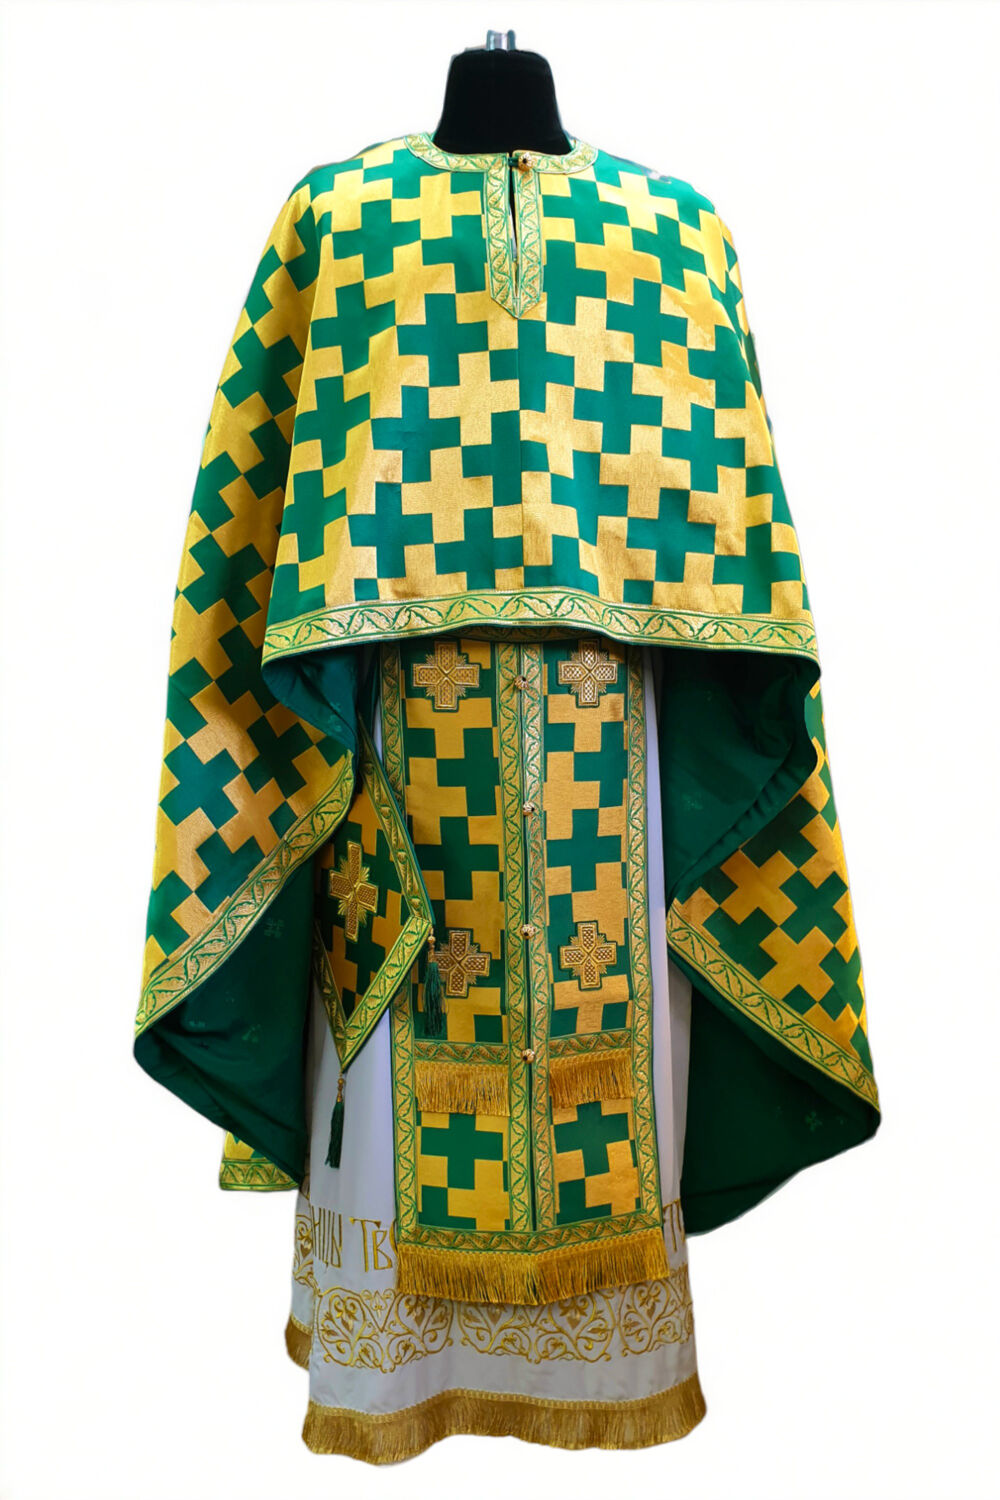 Priest's vestments with liturgical set